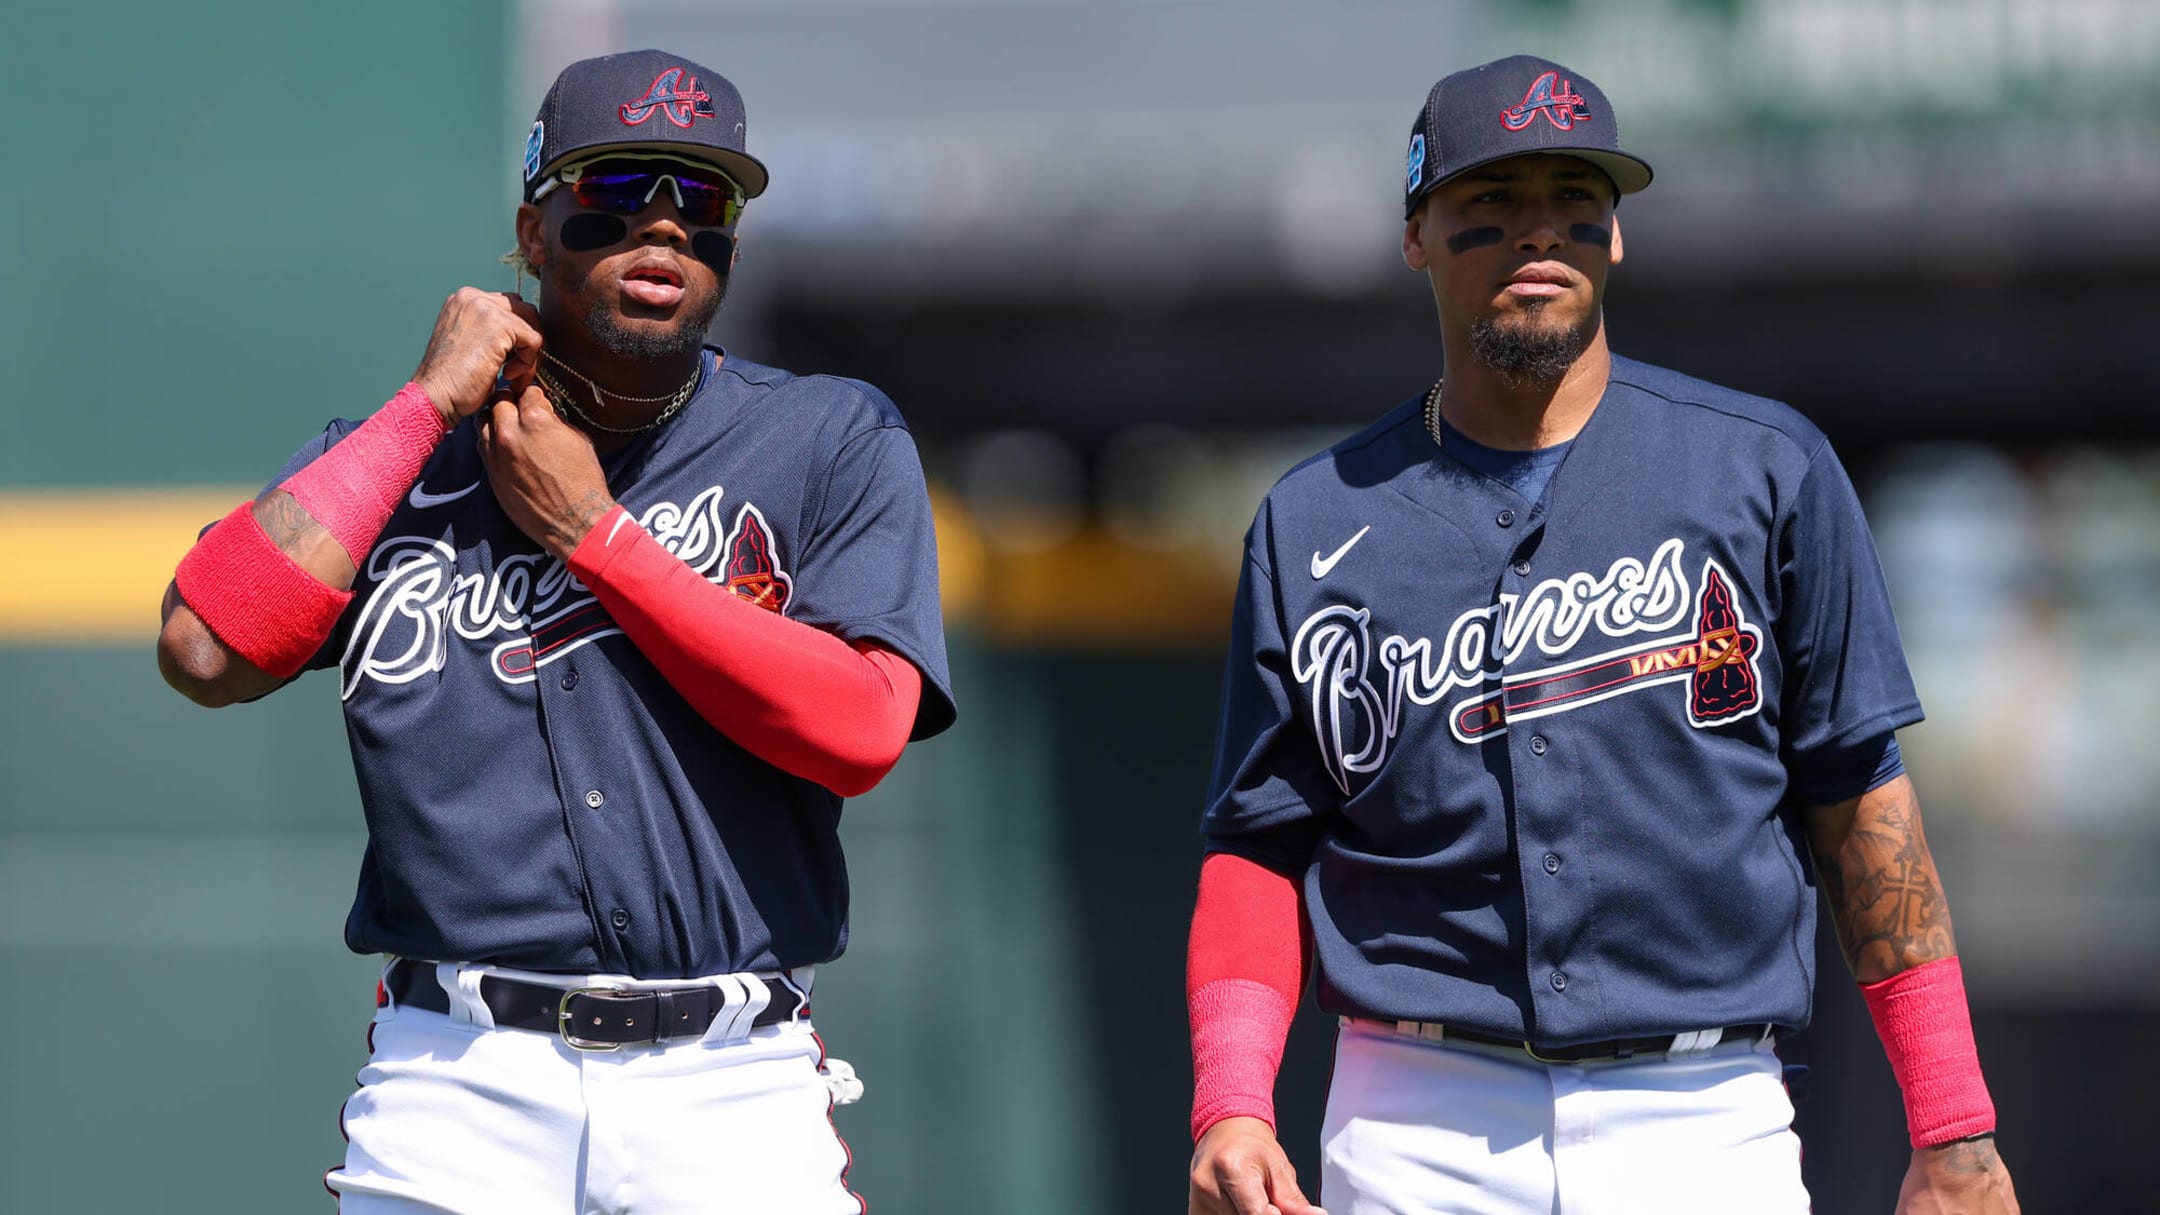 Eric Young Sr. envisions more fireworks and champagne in Braves future